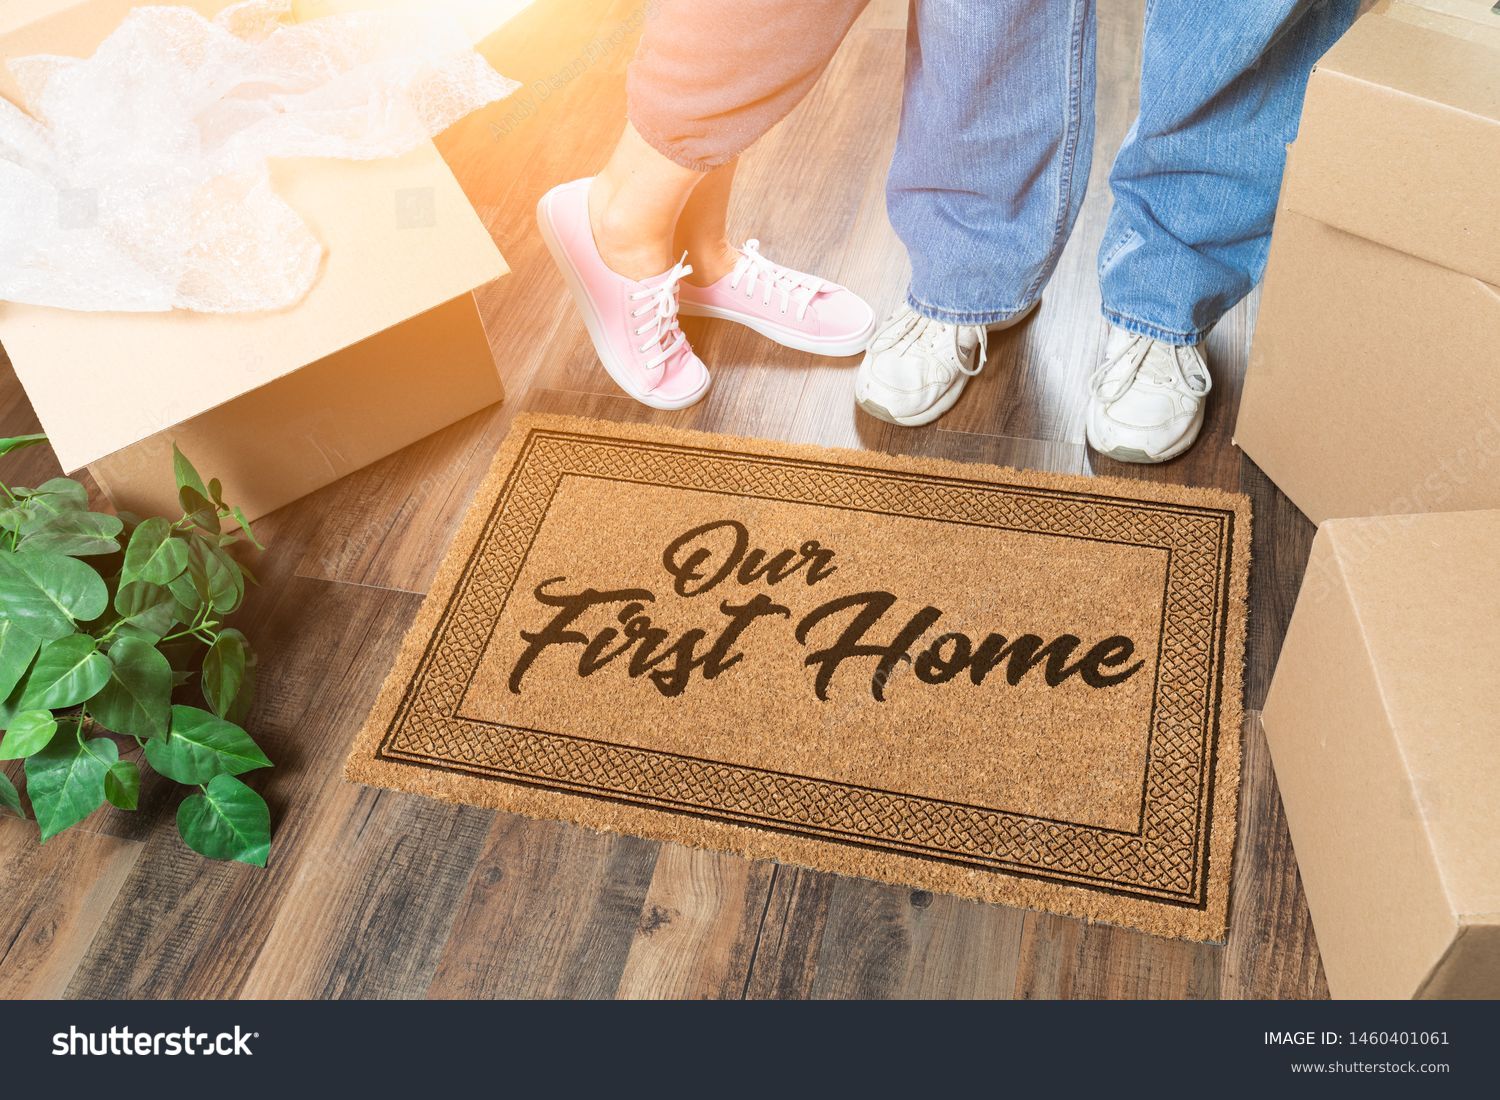 2,325 First time home buyer Images, Stock Photos & Vectors ...